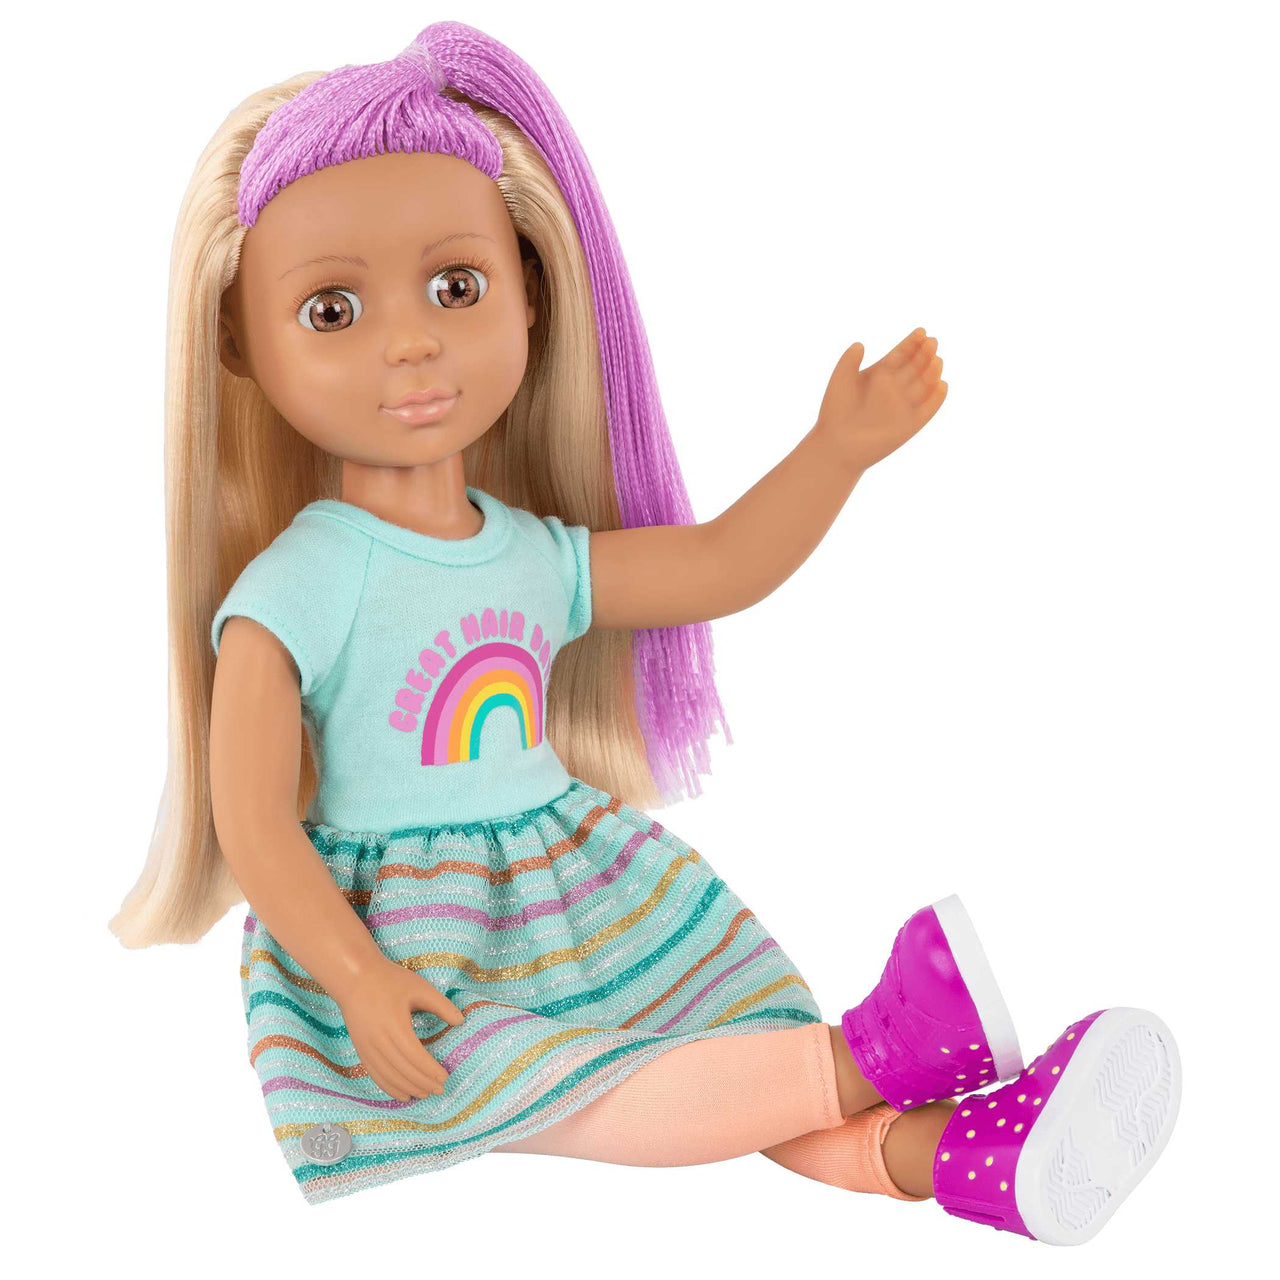 GG51048_Brie-14-inch-poseable-hairdresser-doll-blonde-purple-hair